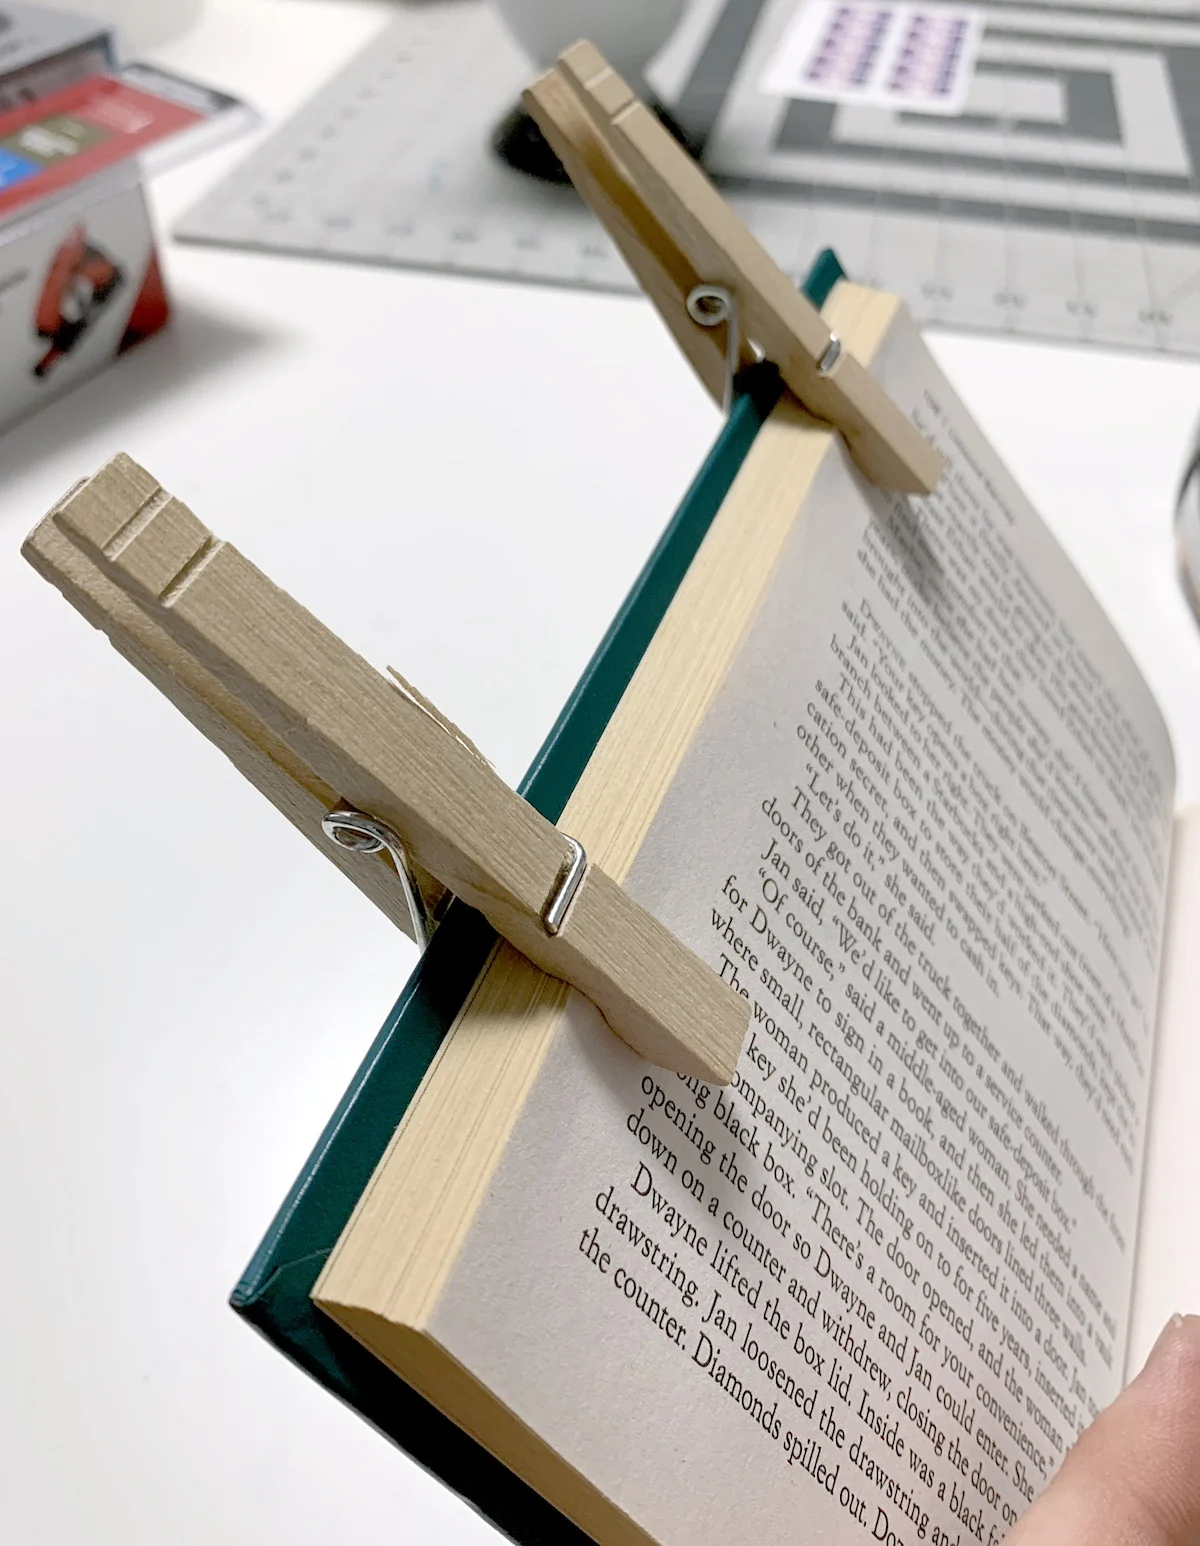 Clip the book open with clothespins